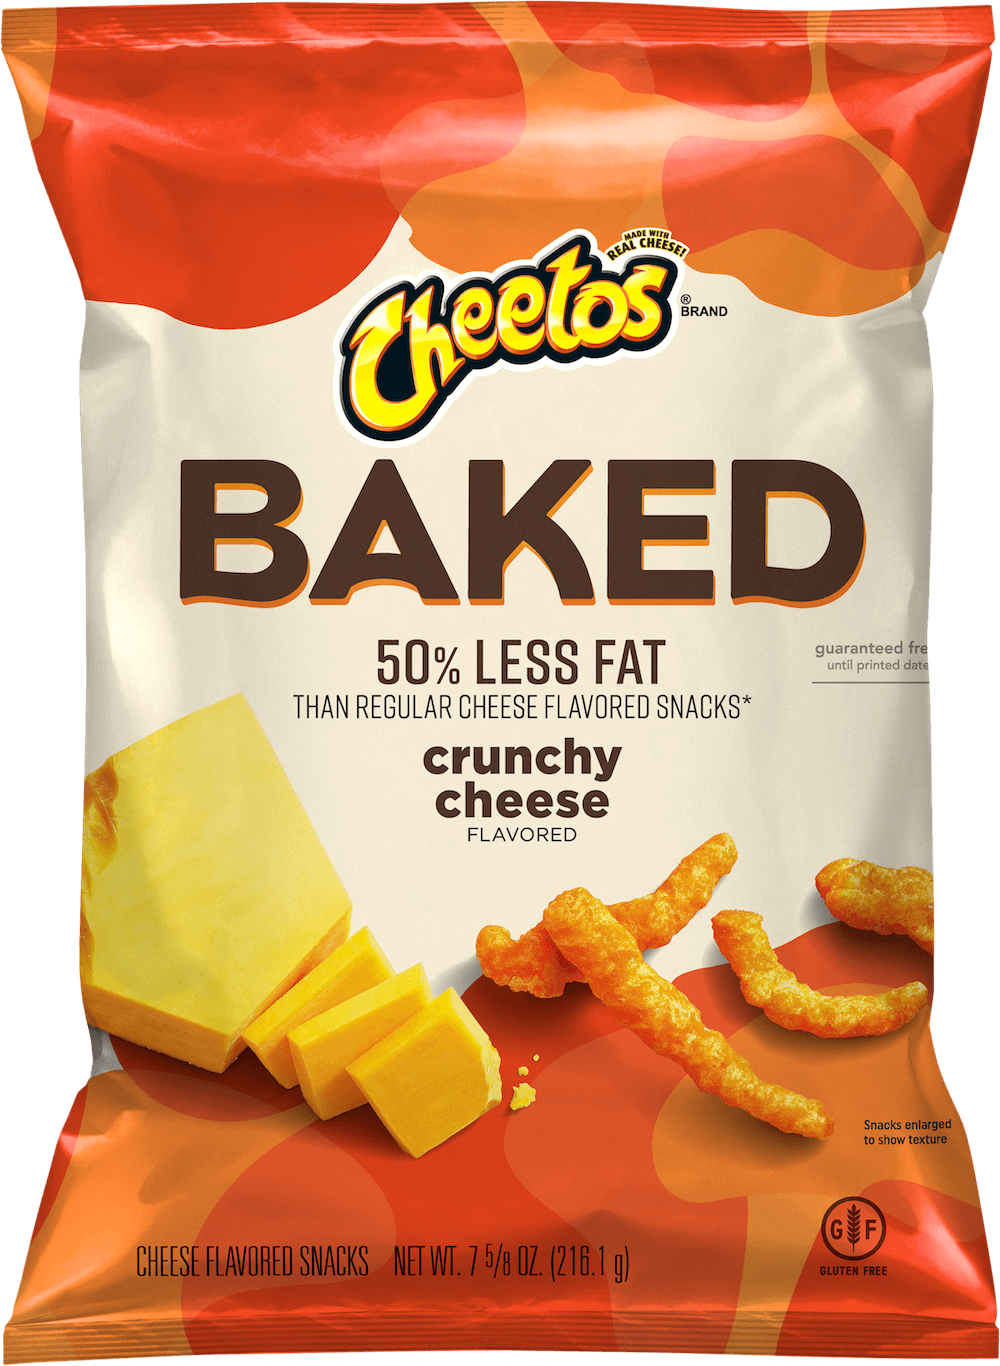 Cheetos® BAKED Crunchy Cheese Flavored Snacks